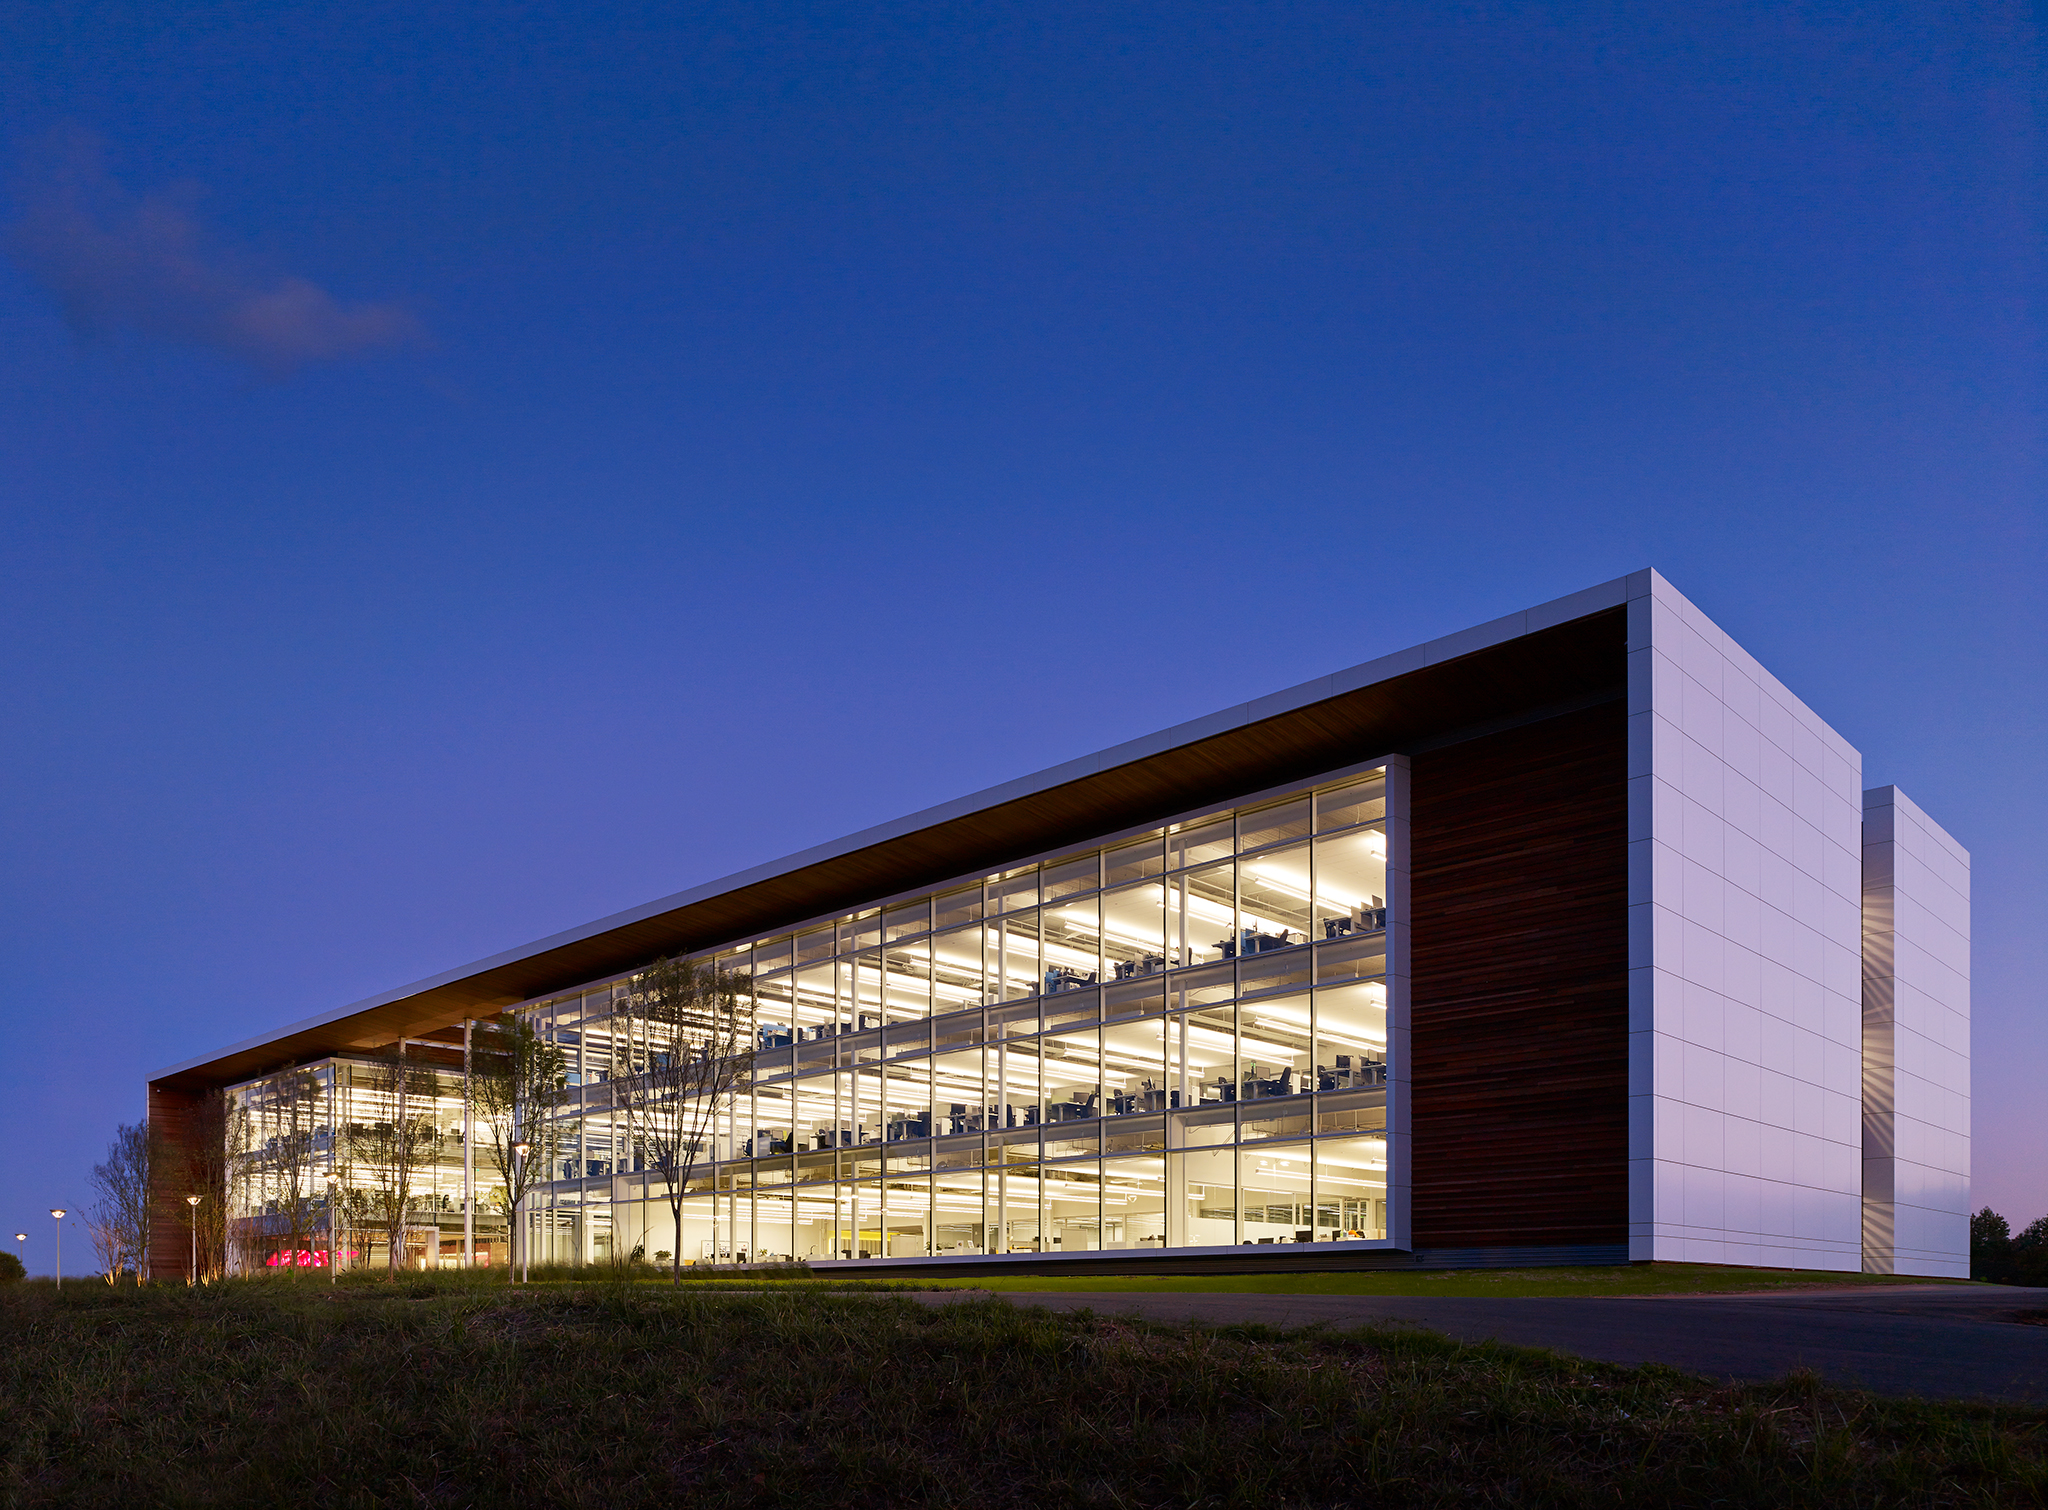  AWARDS  AIA Georgia 2017 Honor Award  &nbsp;  BMW Site Operations Center  Perkins &amp; Will  Spartanburg, South Carolina  &nbsp;   Return to Projects  